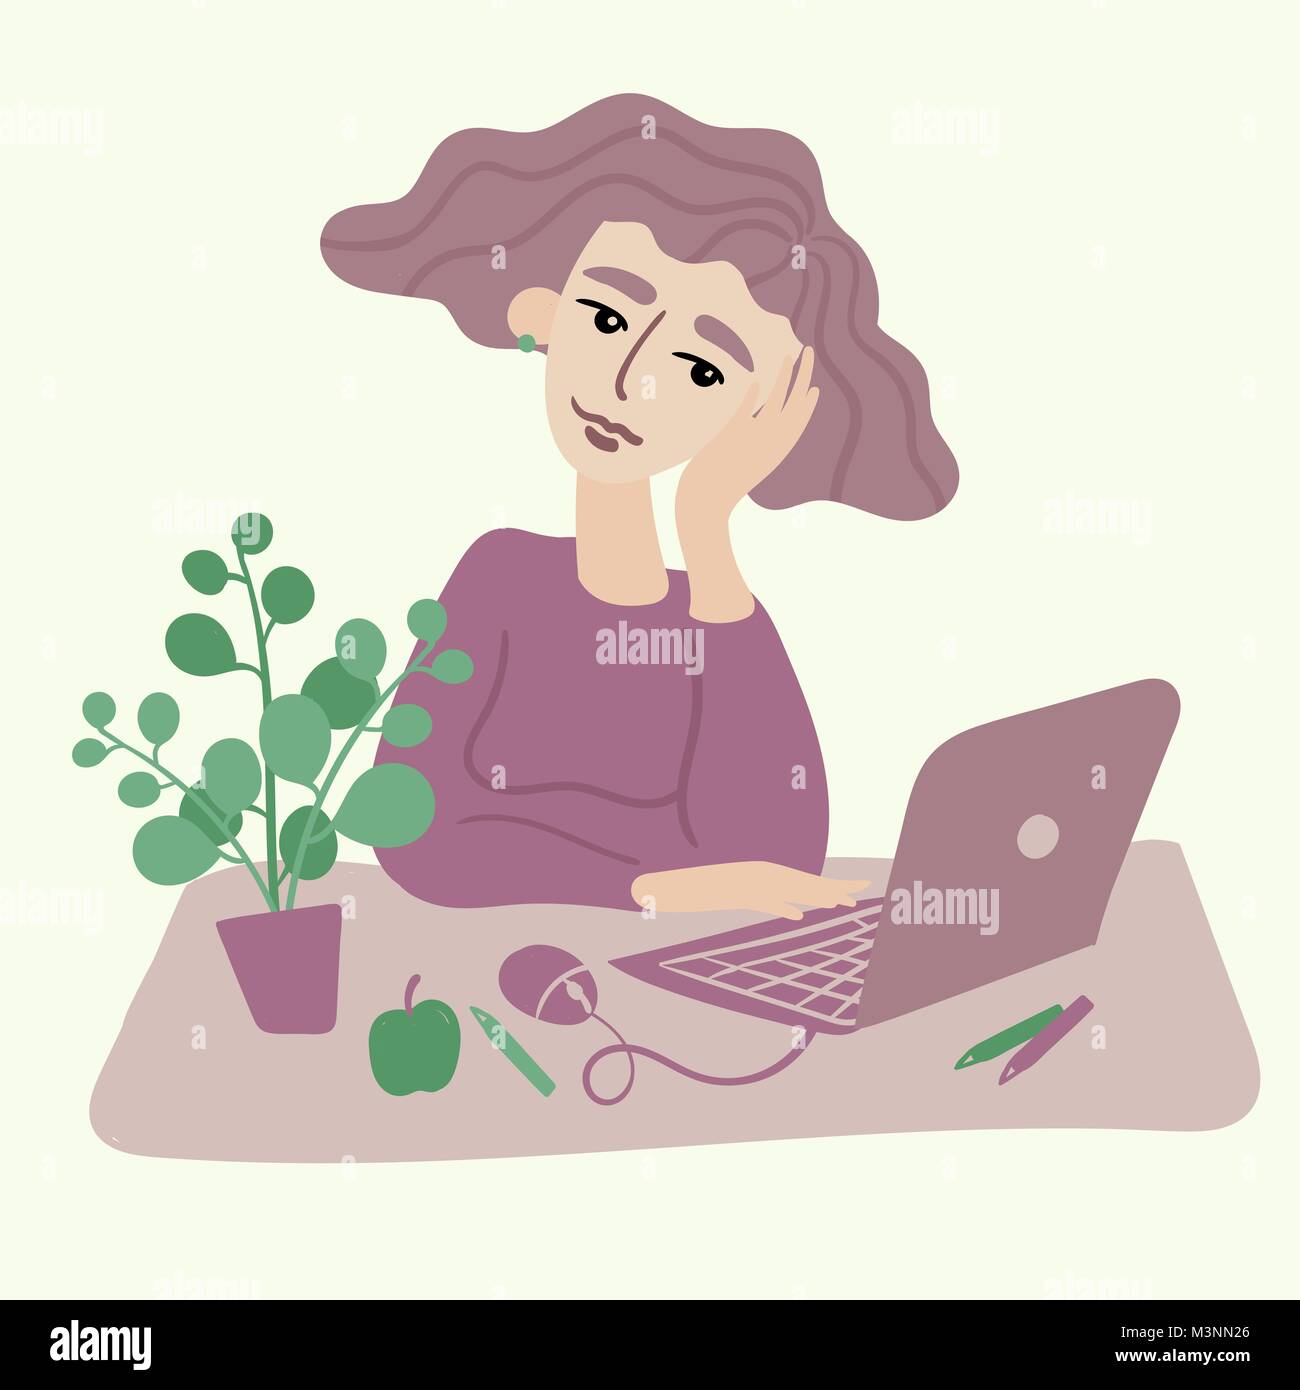 Woman with curly black hair working at a laptop in office Stock Vector